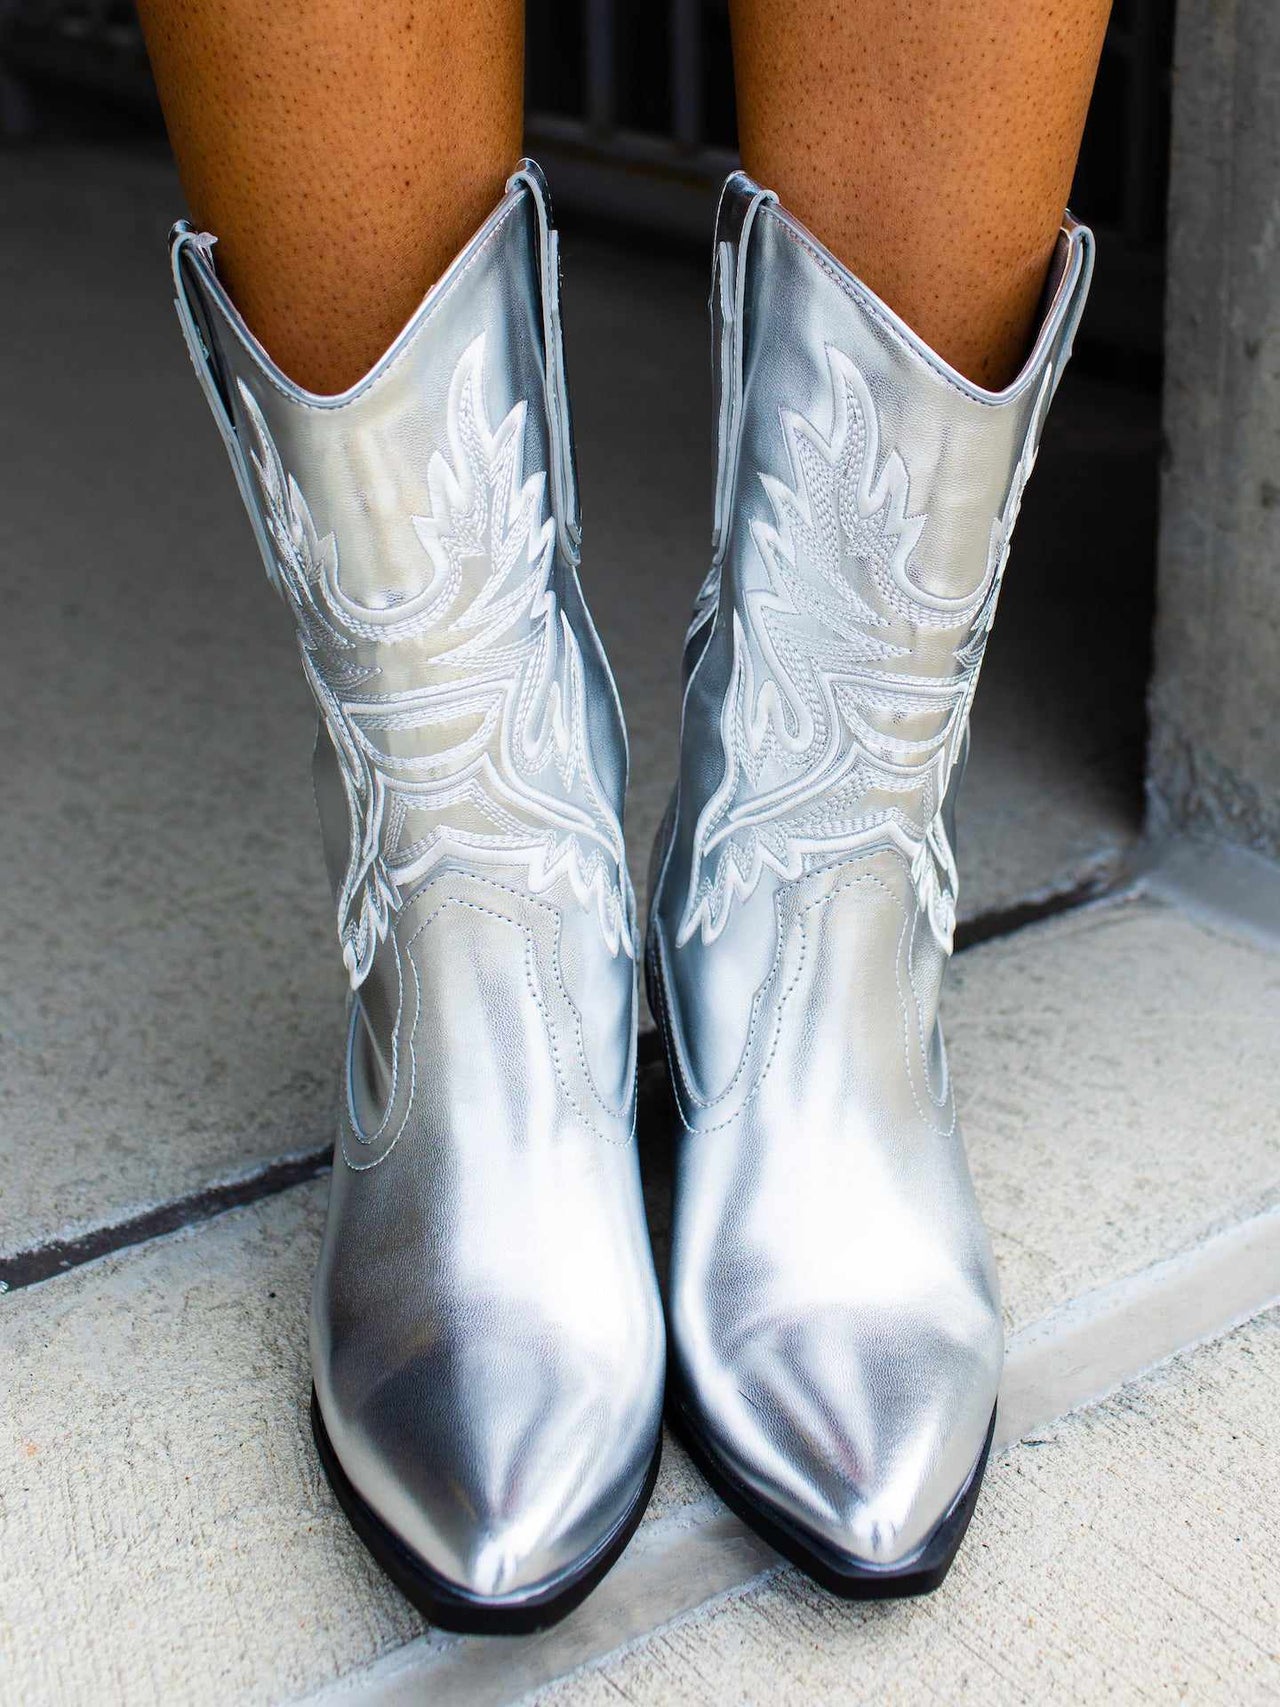 Space Cowgirl Booties - Silver Metallic